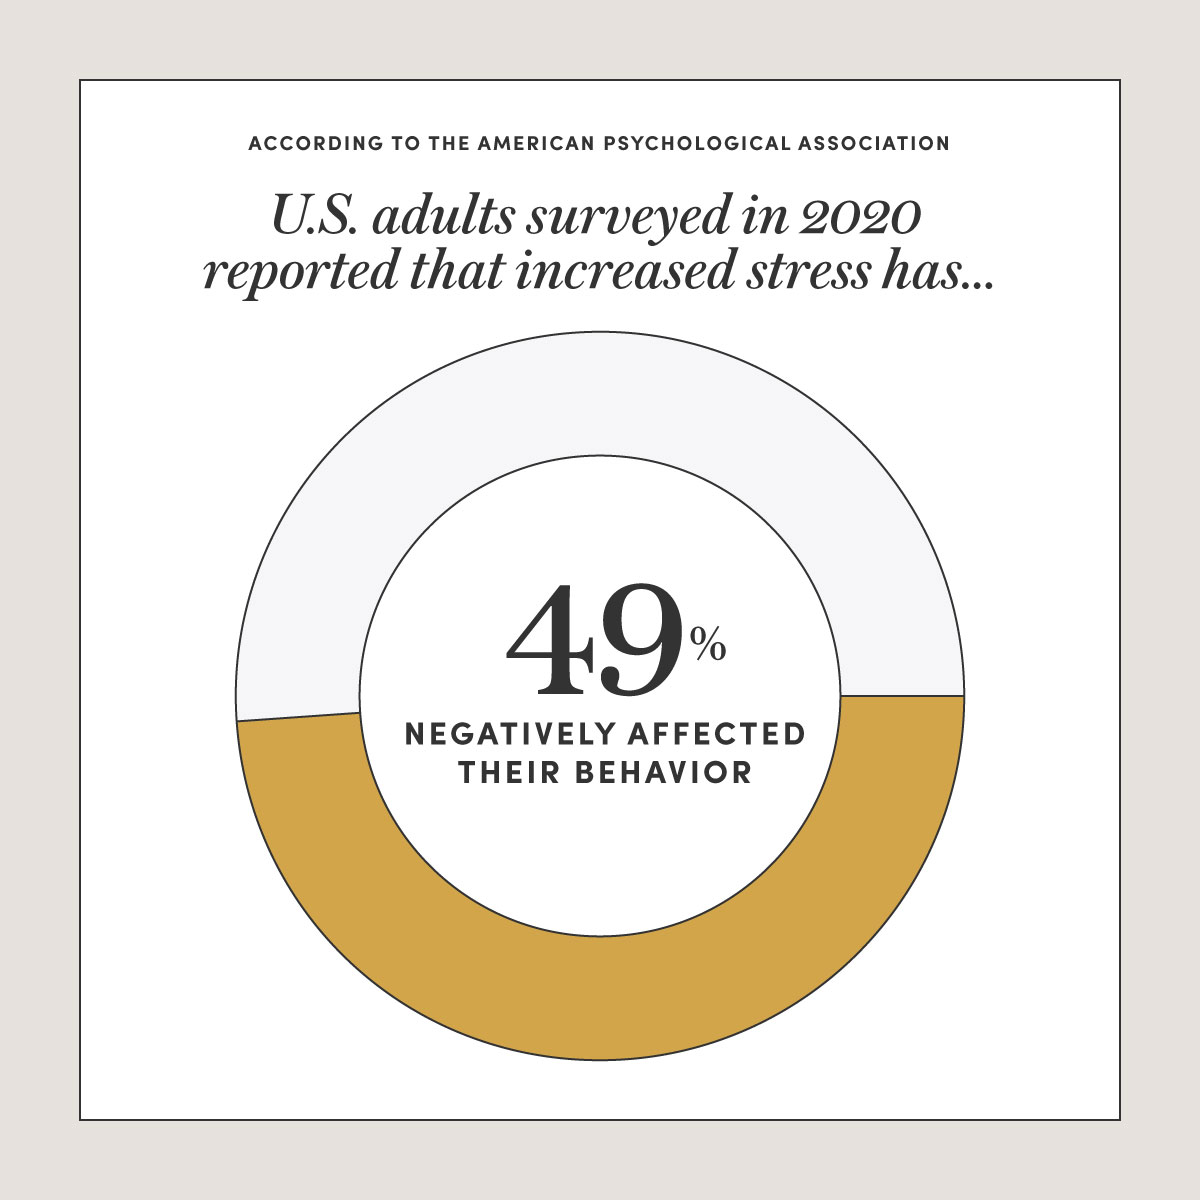 According to the American Psychological Association, 49% of U.S. adults surveyed in 2020 reported that increased stress has negatively affected their behavior.